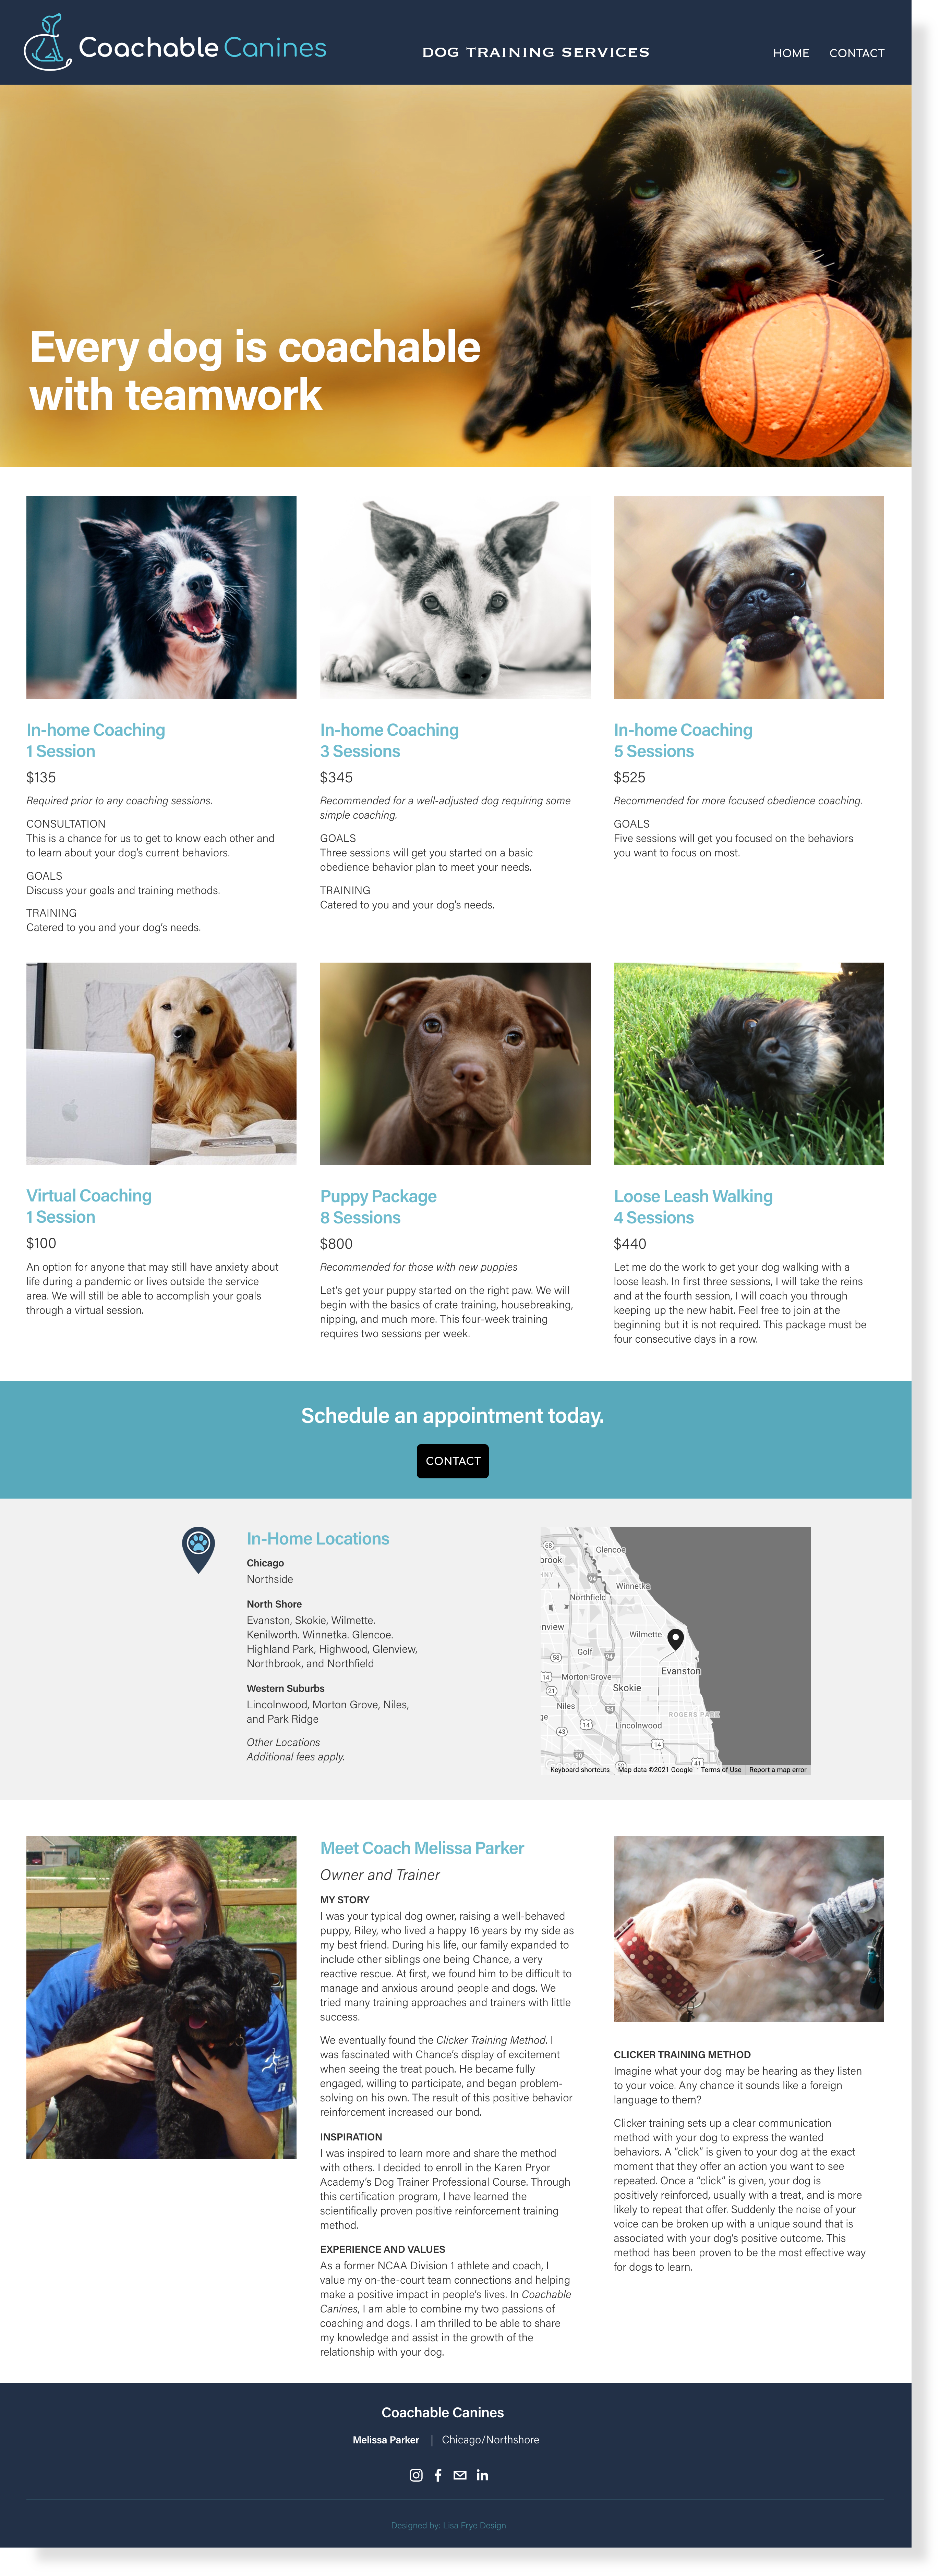 Coachable Canines Home Page